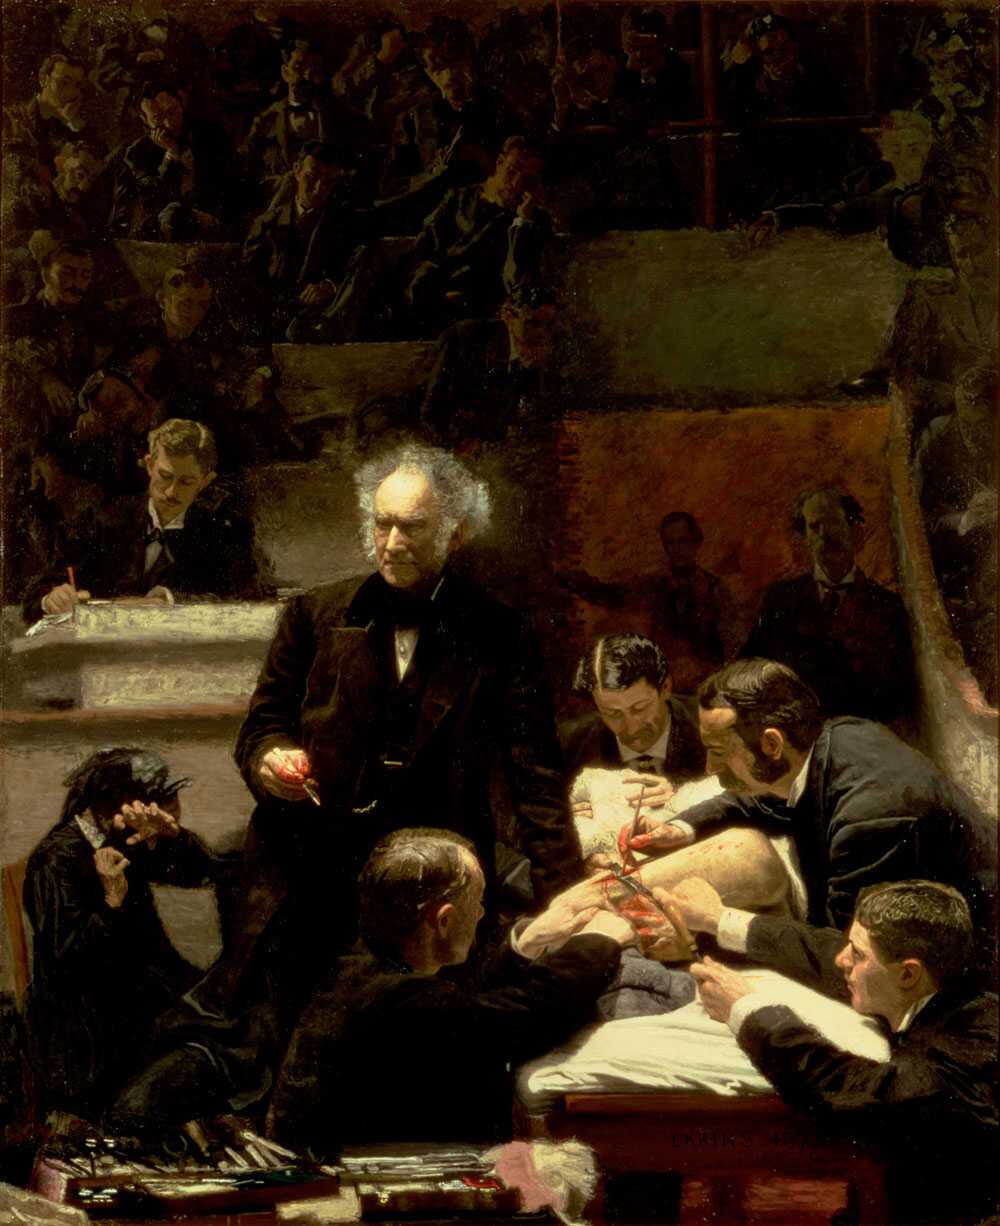 Thomas Eakins' "The Gross Clinic" (1875)